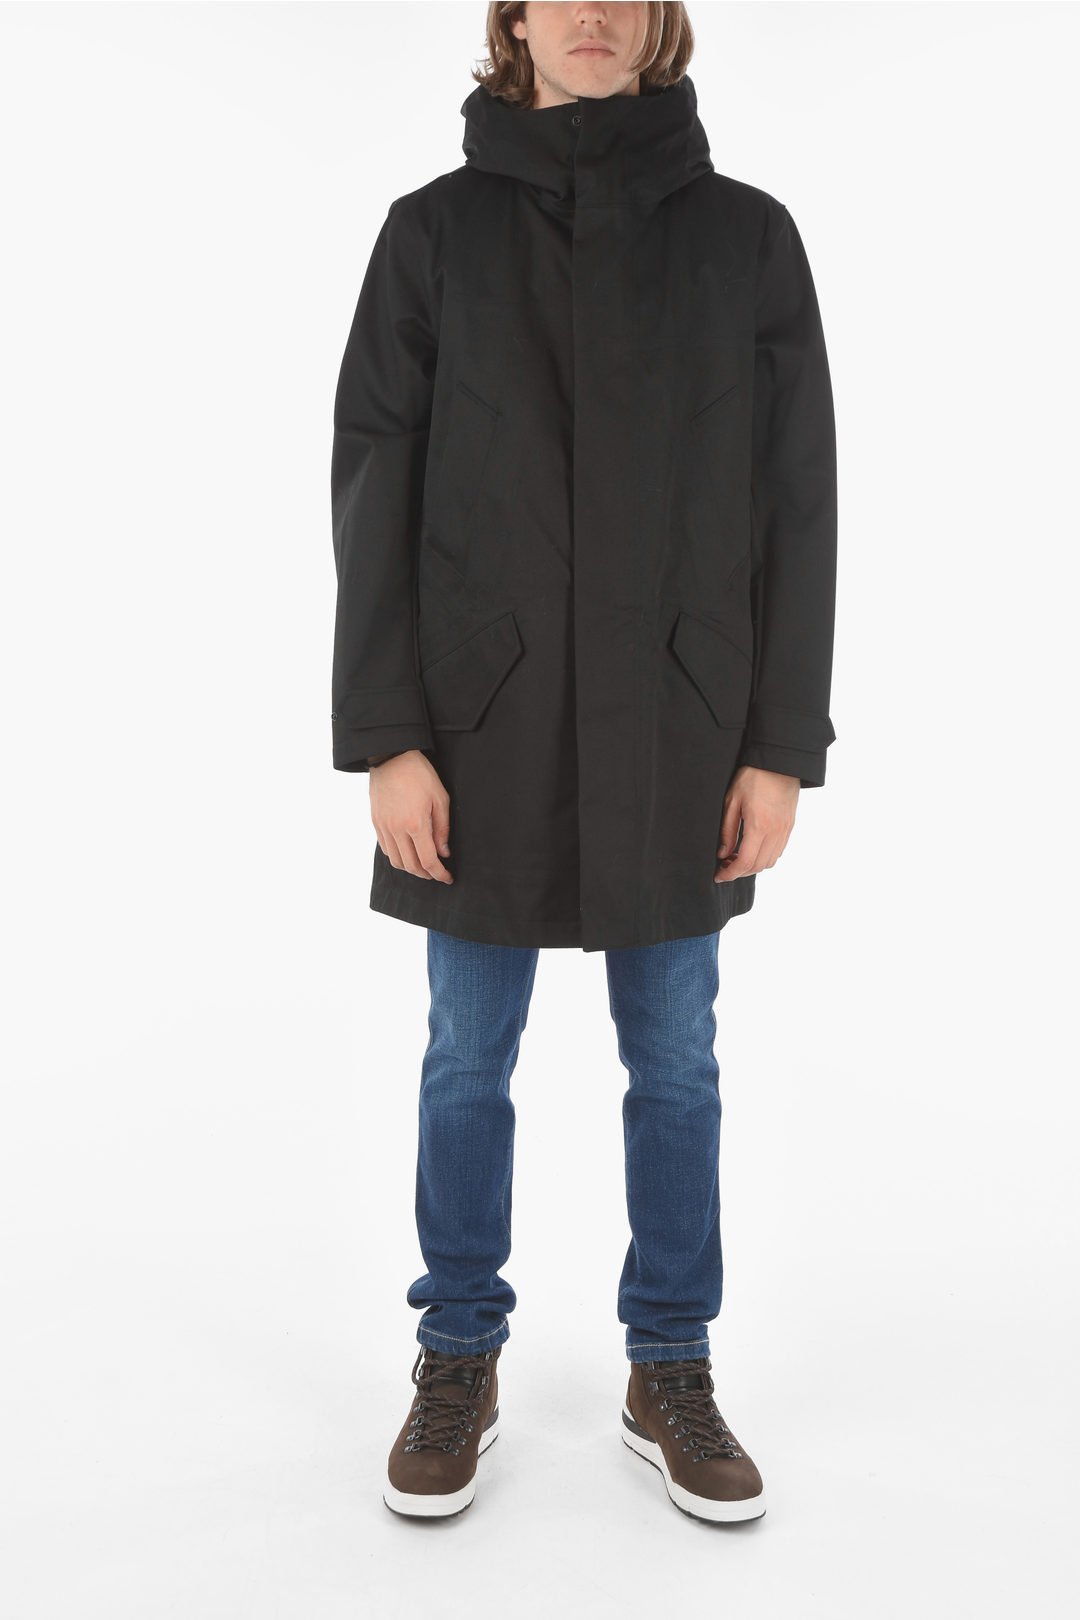 Woolrich removable inner 3IN1 FISHTAIL parka men - Glamood Outlet